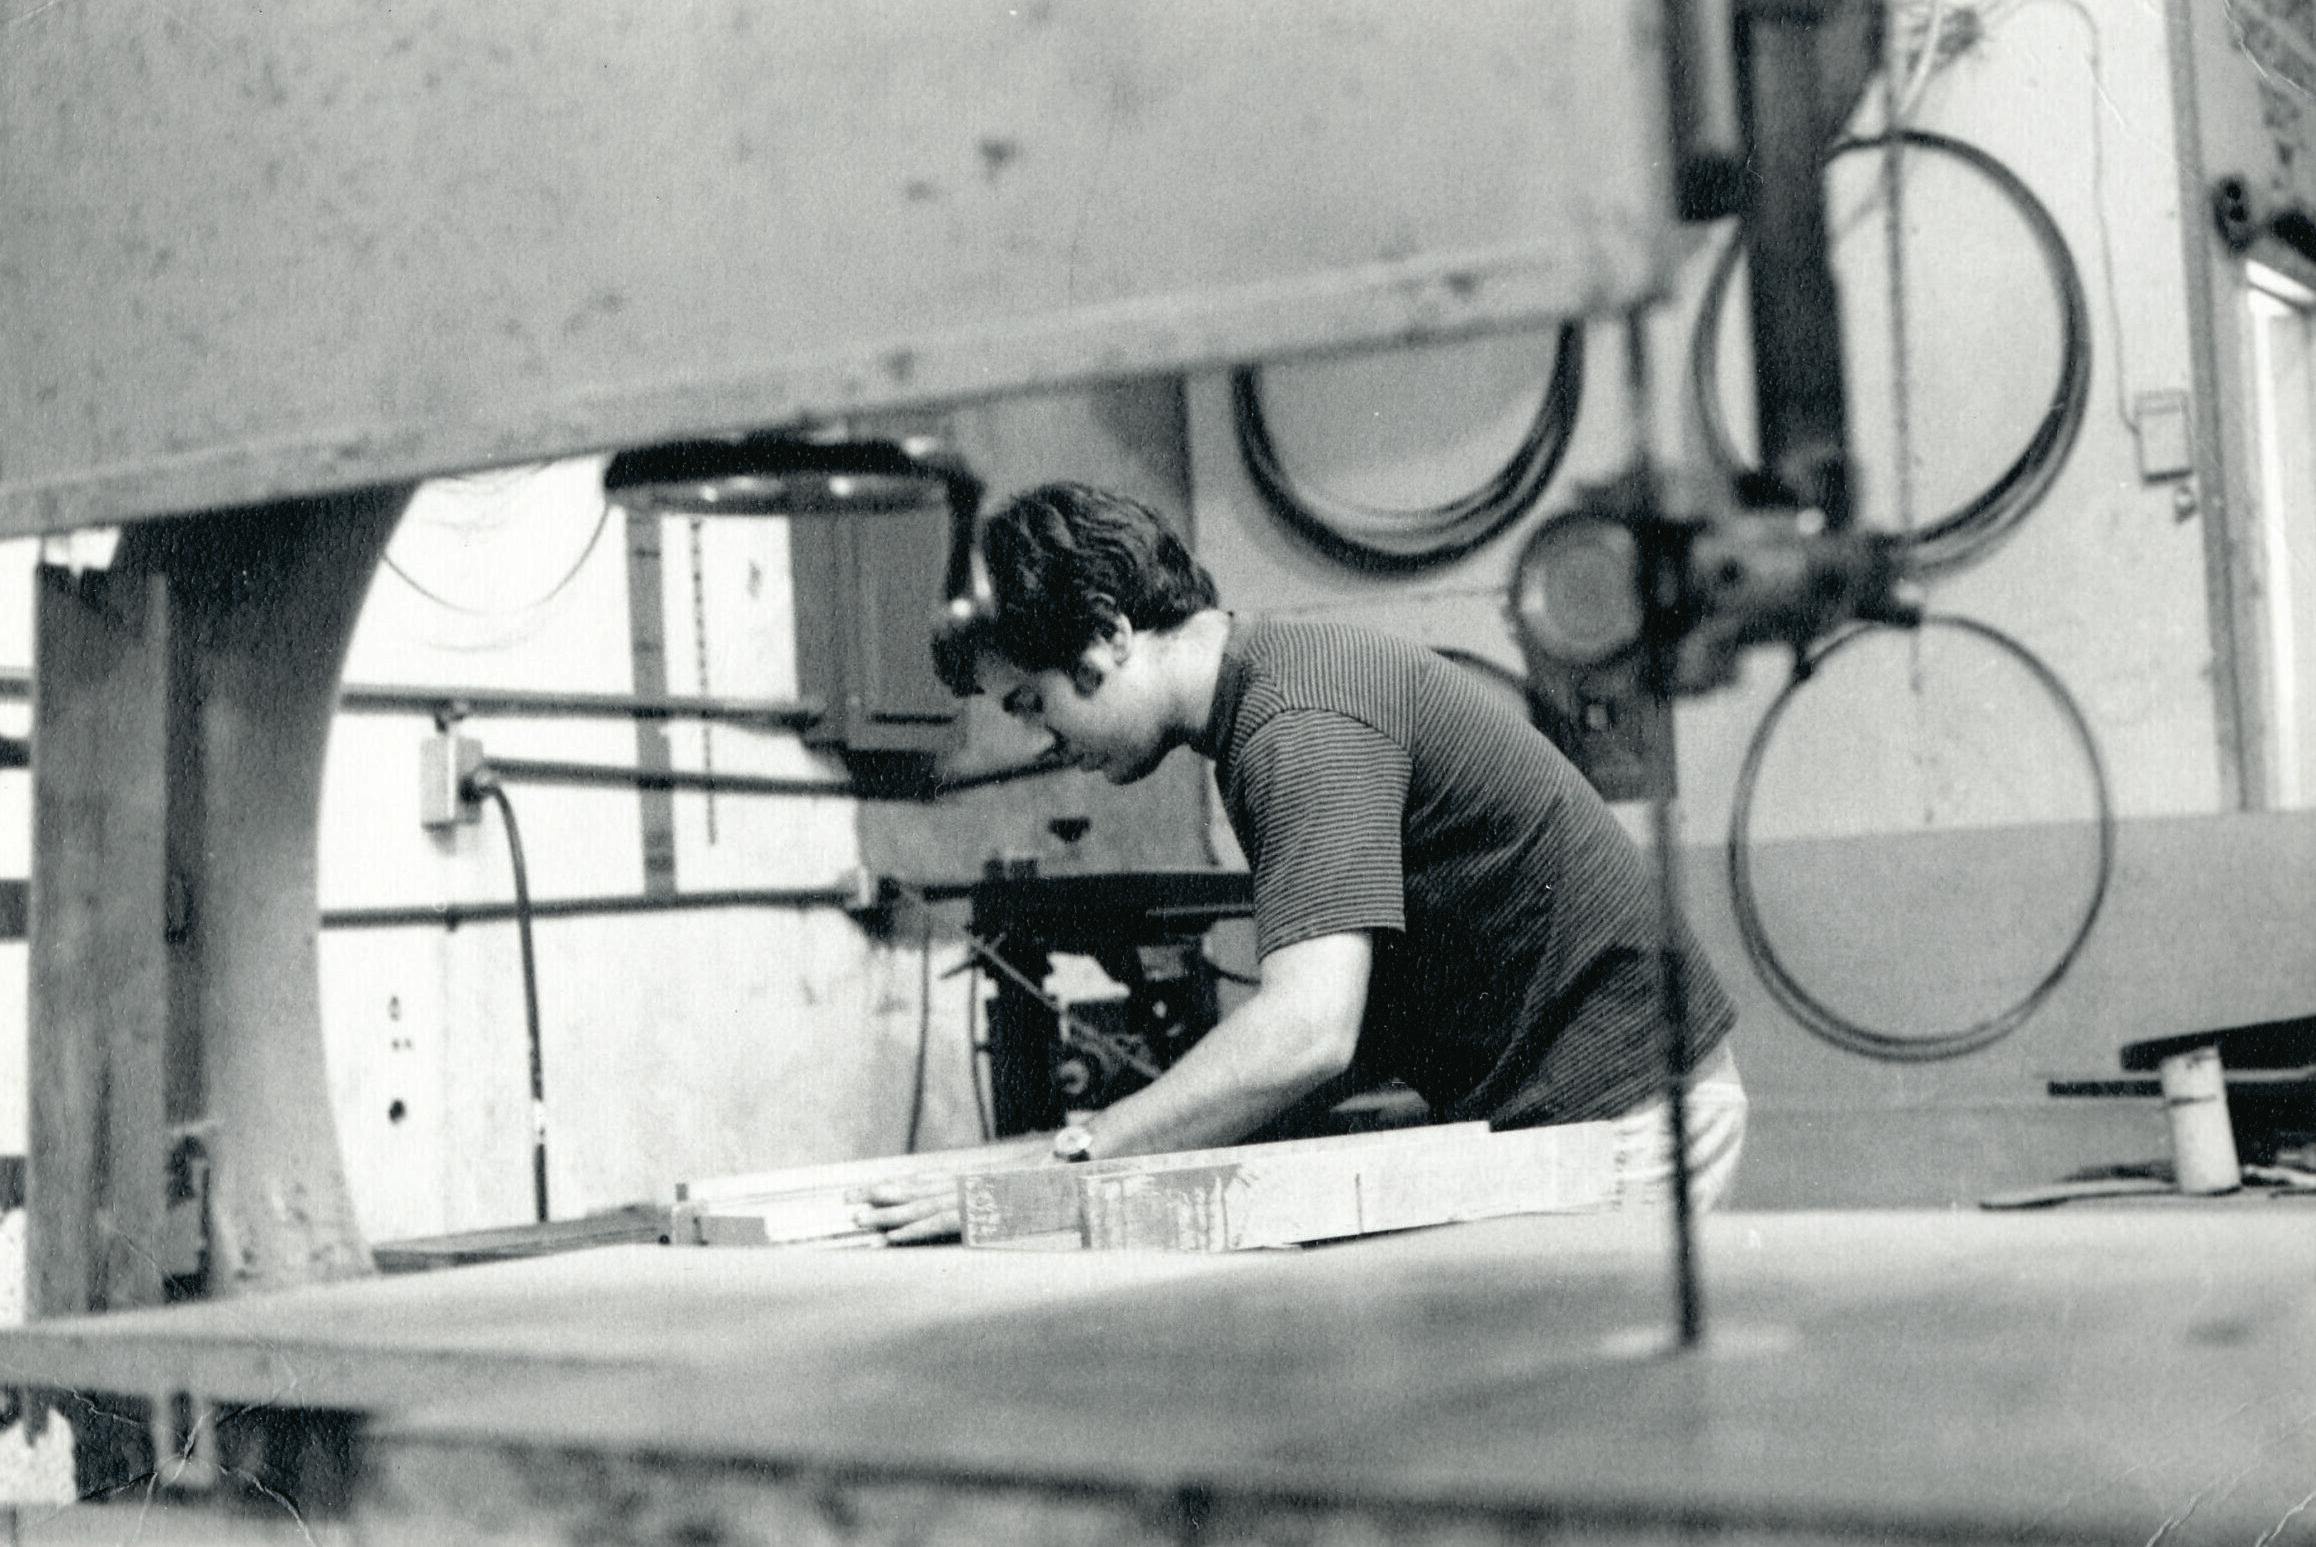 Taylor Guitars co-founder Kurt Listug working in the wood shop in 1975